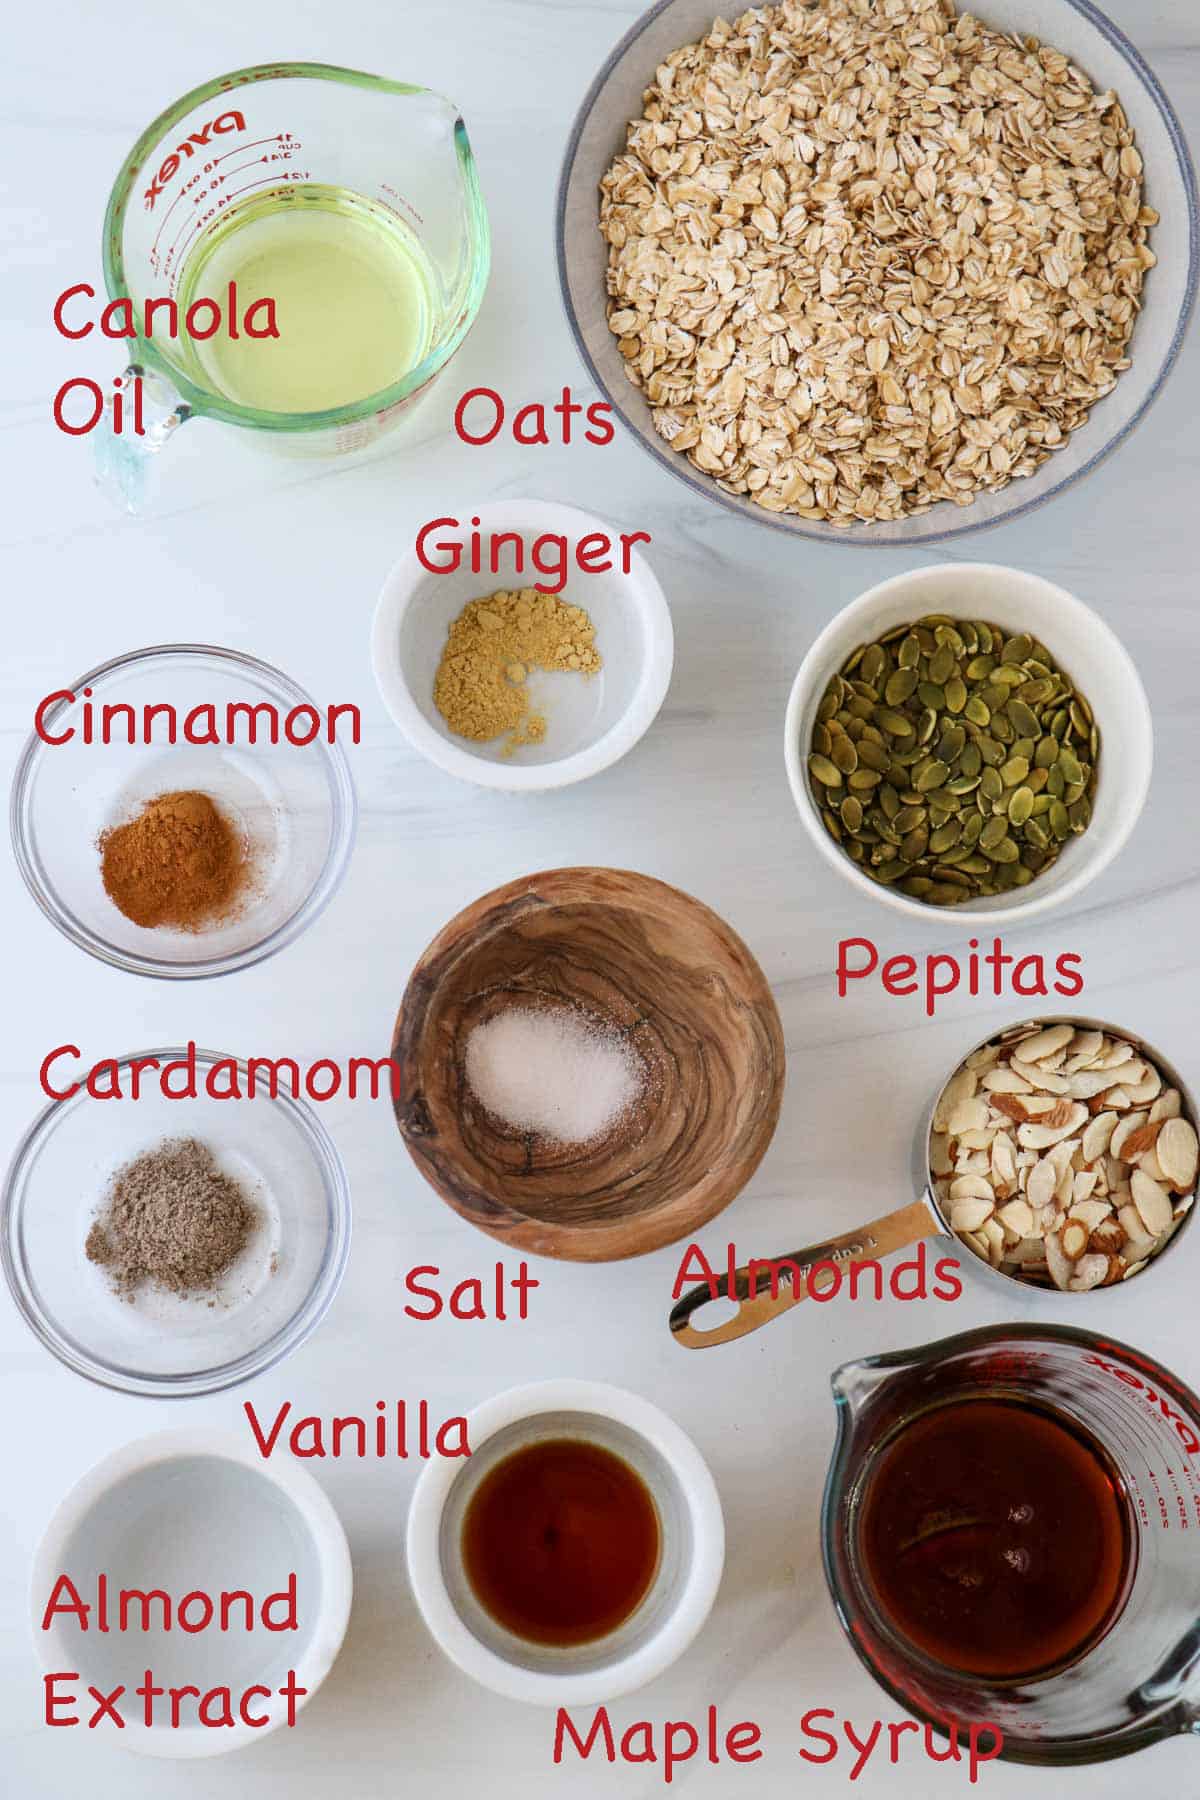 Labeled ingredients for Homemade Cardamom Granola with Almonds